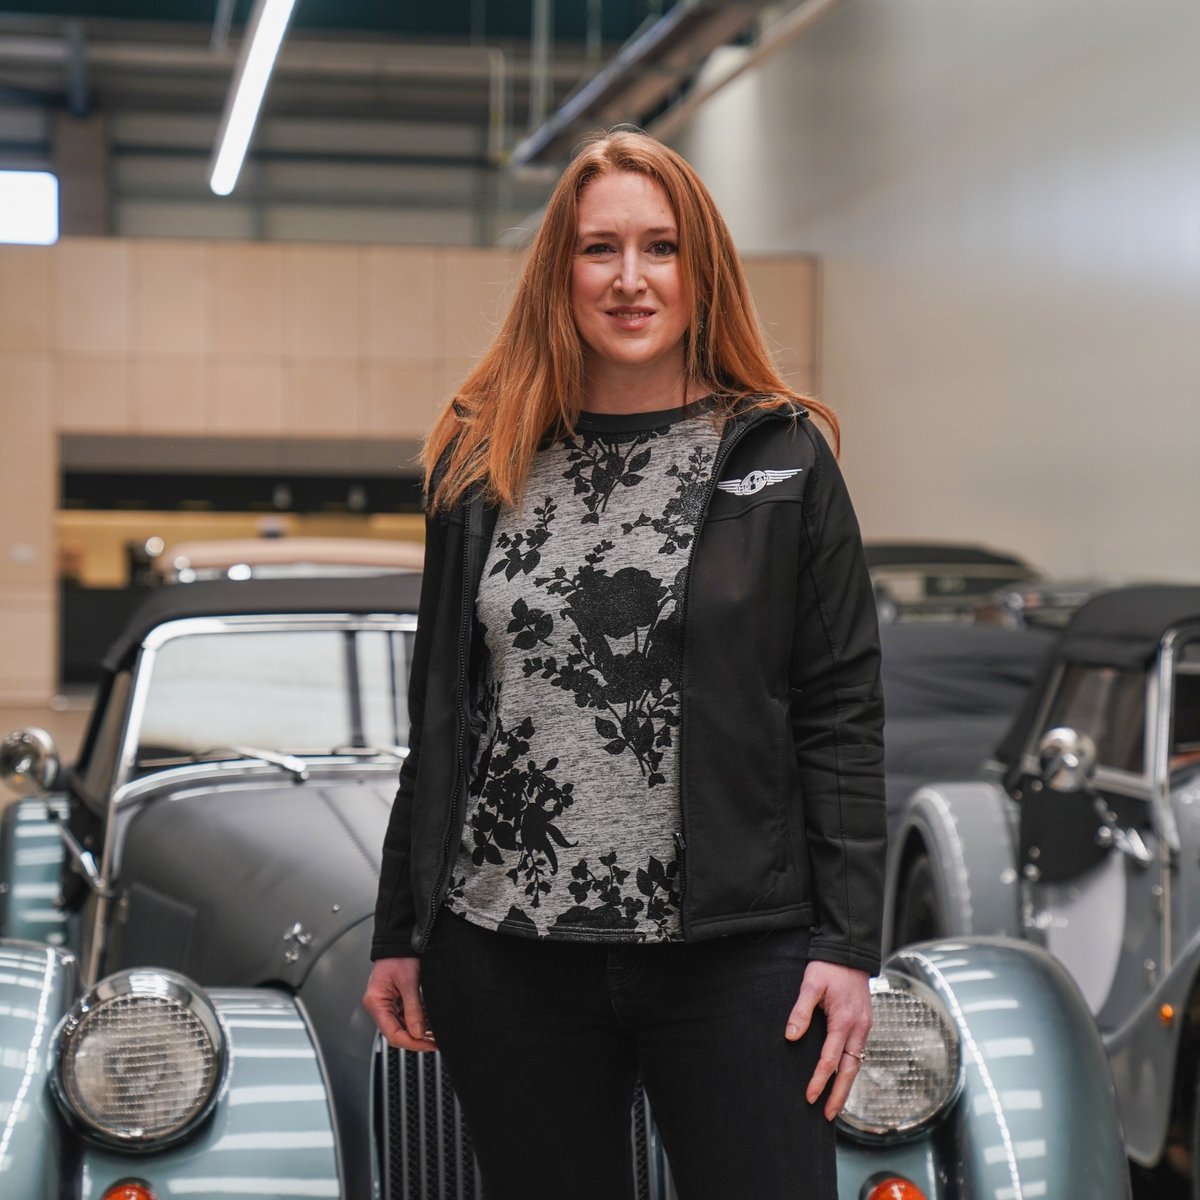 On #InternationalWomensDay we are celebrating four women working behind the scenes across the Morgan business 🙌

Sarah Baldwin, Human Resources Manager
Joanne Gill, Design Engineer
Heather Merrison, Supply Chain Buyer
Georgiana Pavel, Process Engineer
#Morgan #MorganMotorCompany